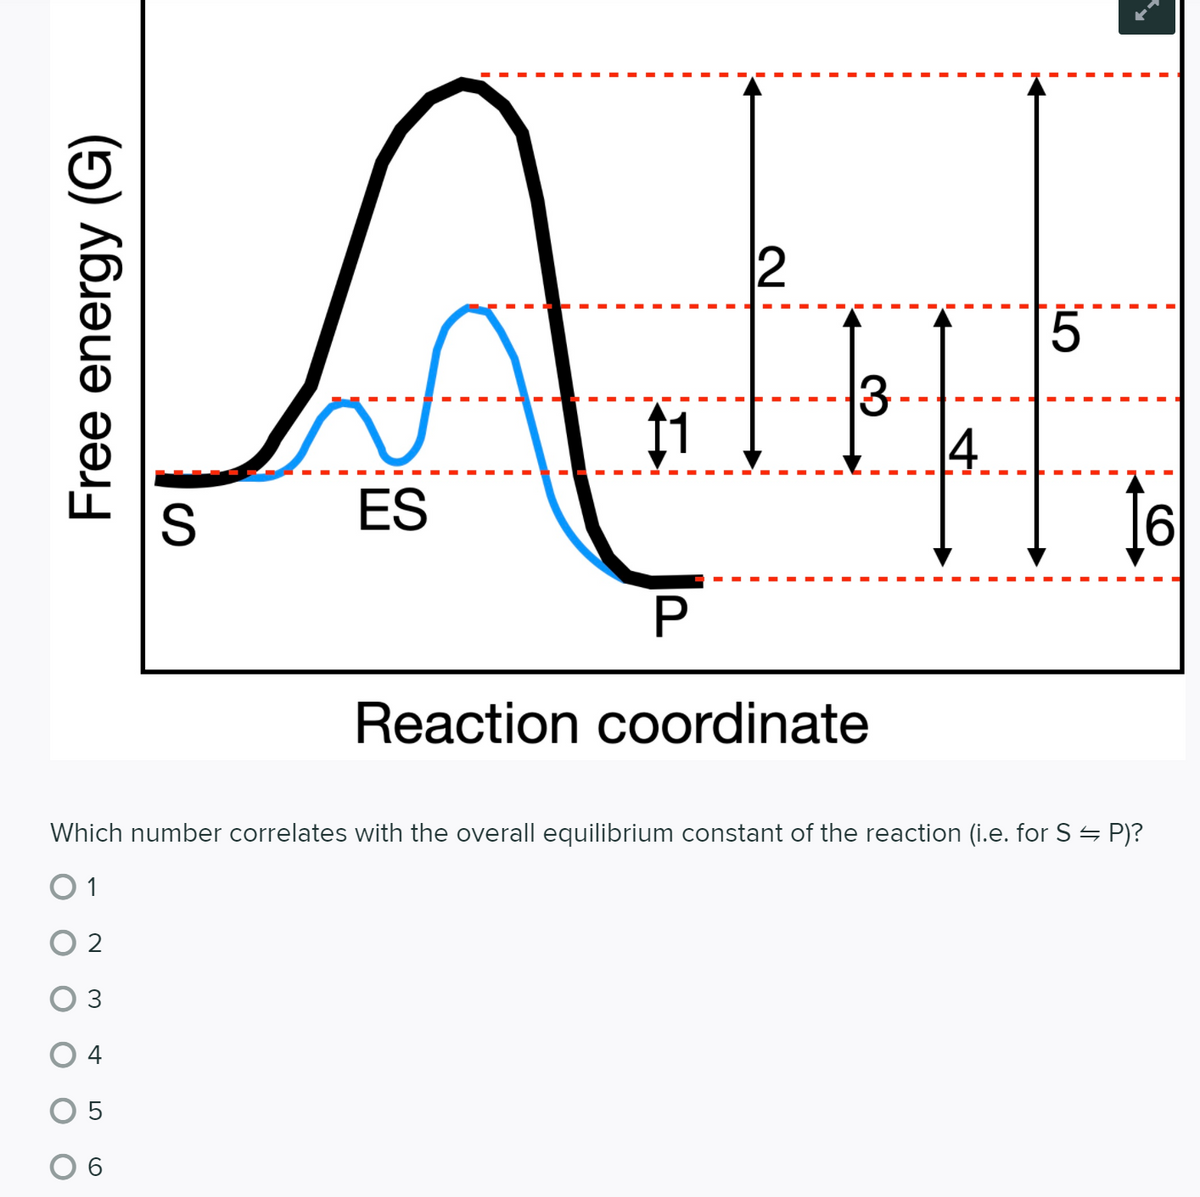 4
ES
16
P
Reaction coordinate
Which number correlates with the overall equilibrium constant of the reaction (i.e. for S – P)?
O 1
O 2
4
6
Free energy (G)
3.
